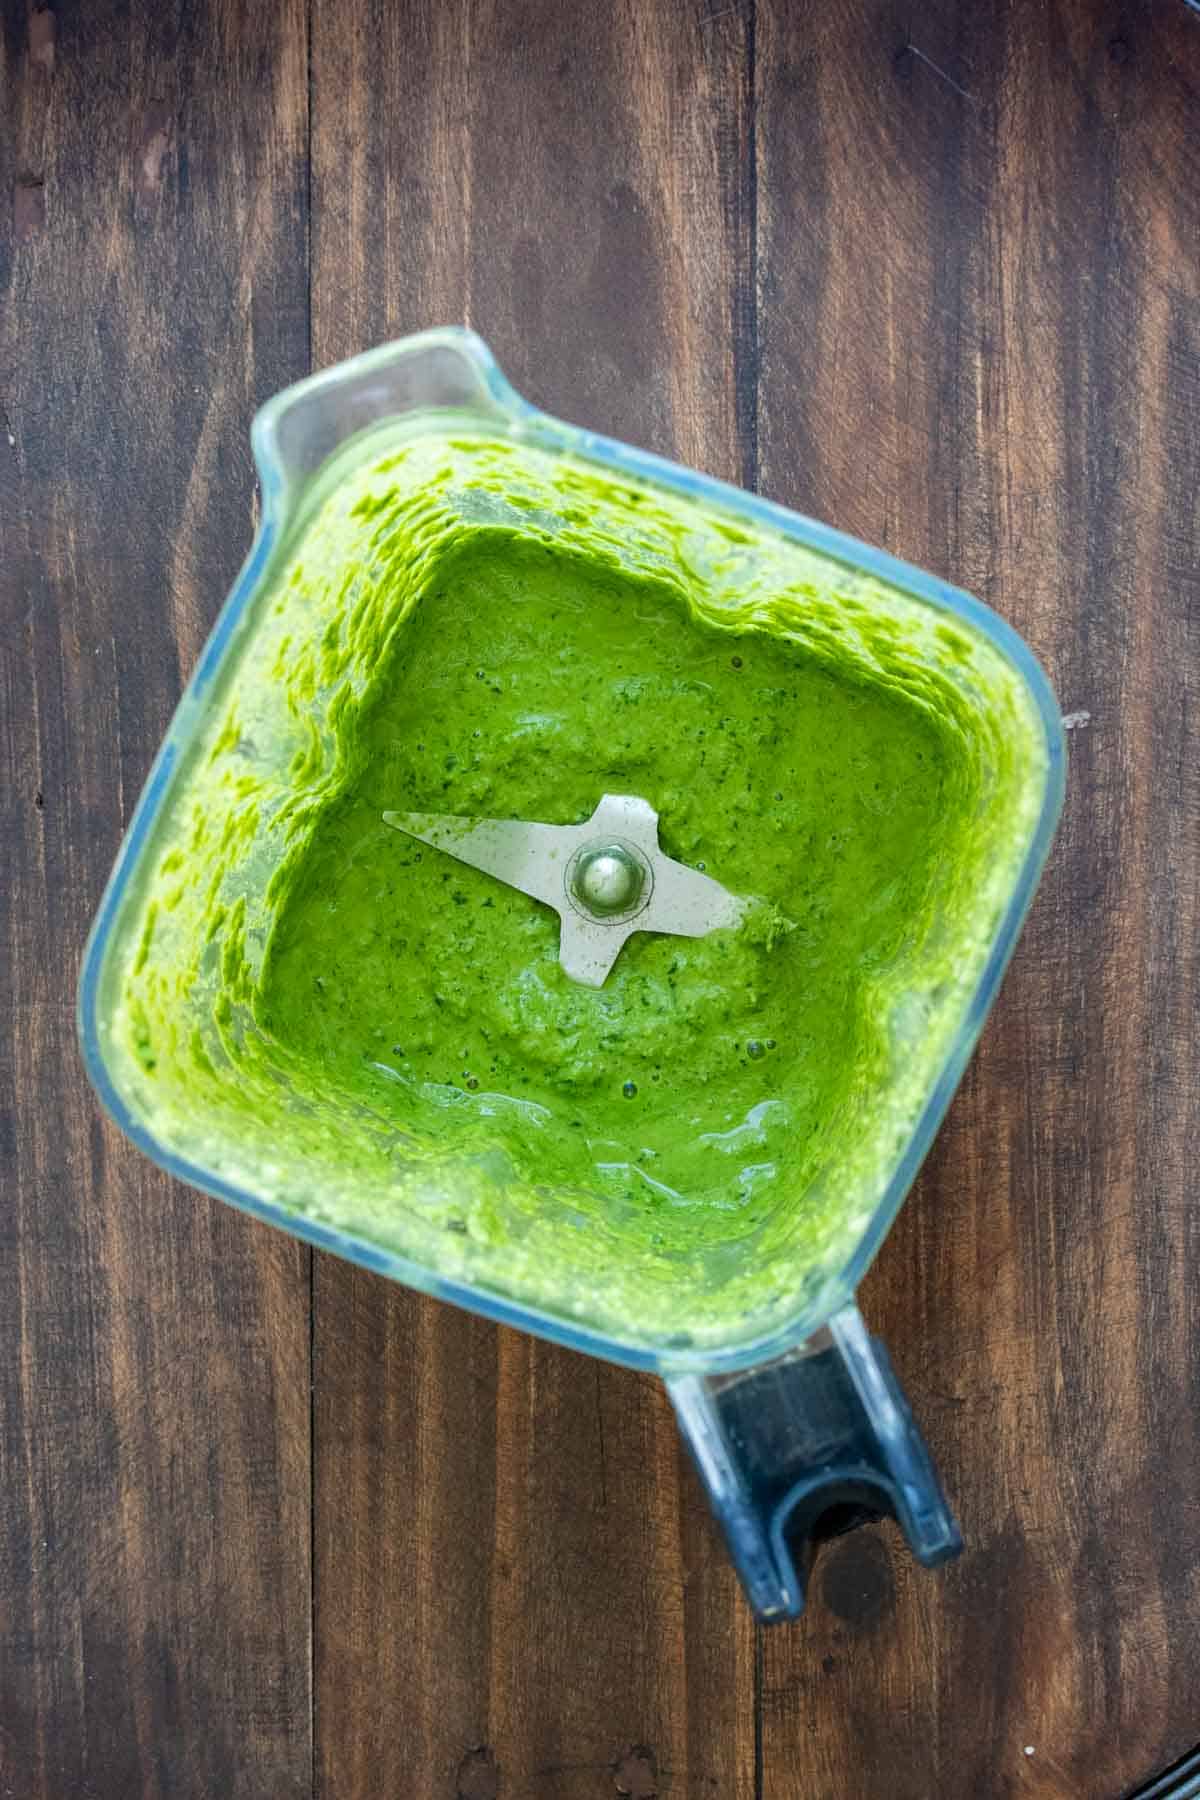 Top view of a blender with pureed kale pesto inside